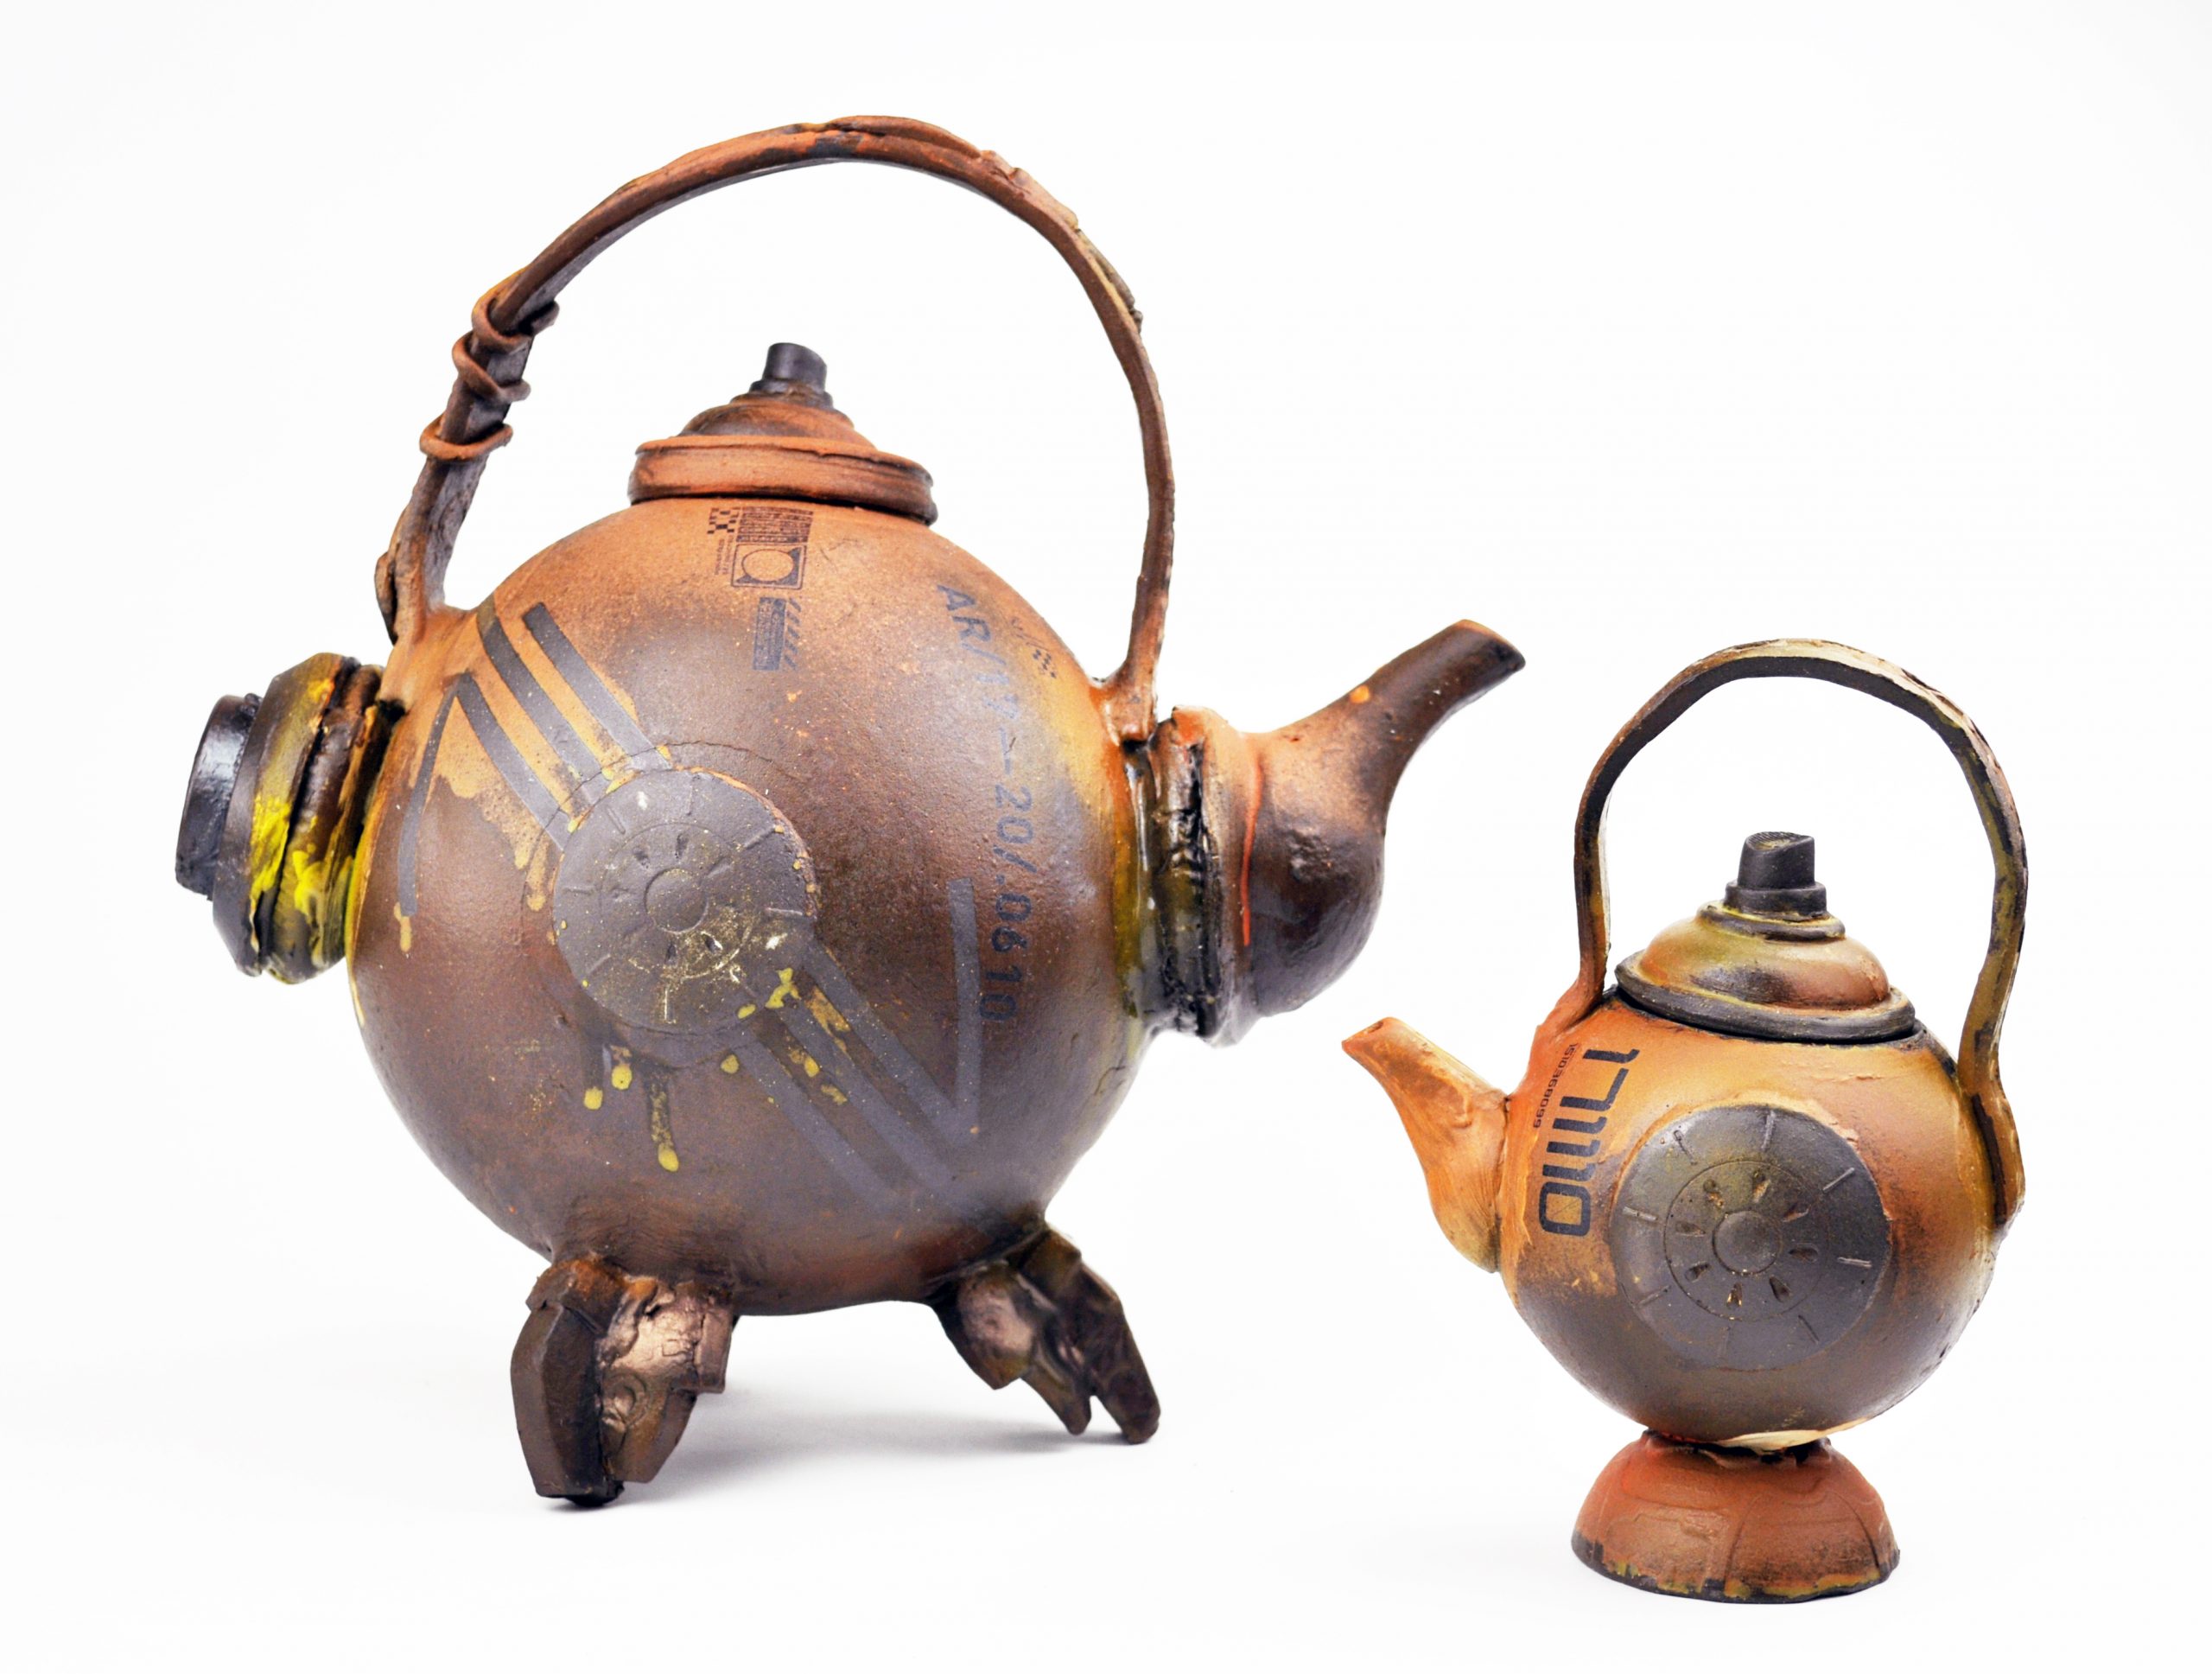 William Jackson III, Sci-Fi Teapots, large teapot: 9 in. (23 cm) in height, small teapot: 8 in. (20 cm) in height, 710 brown clay, fired to cone 6